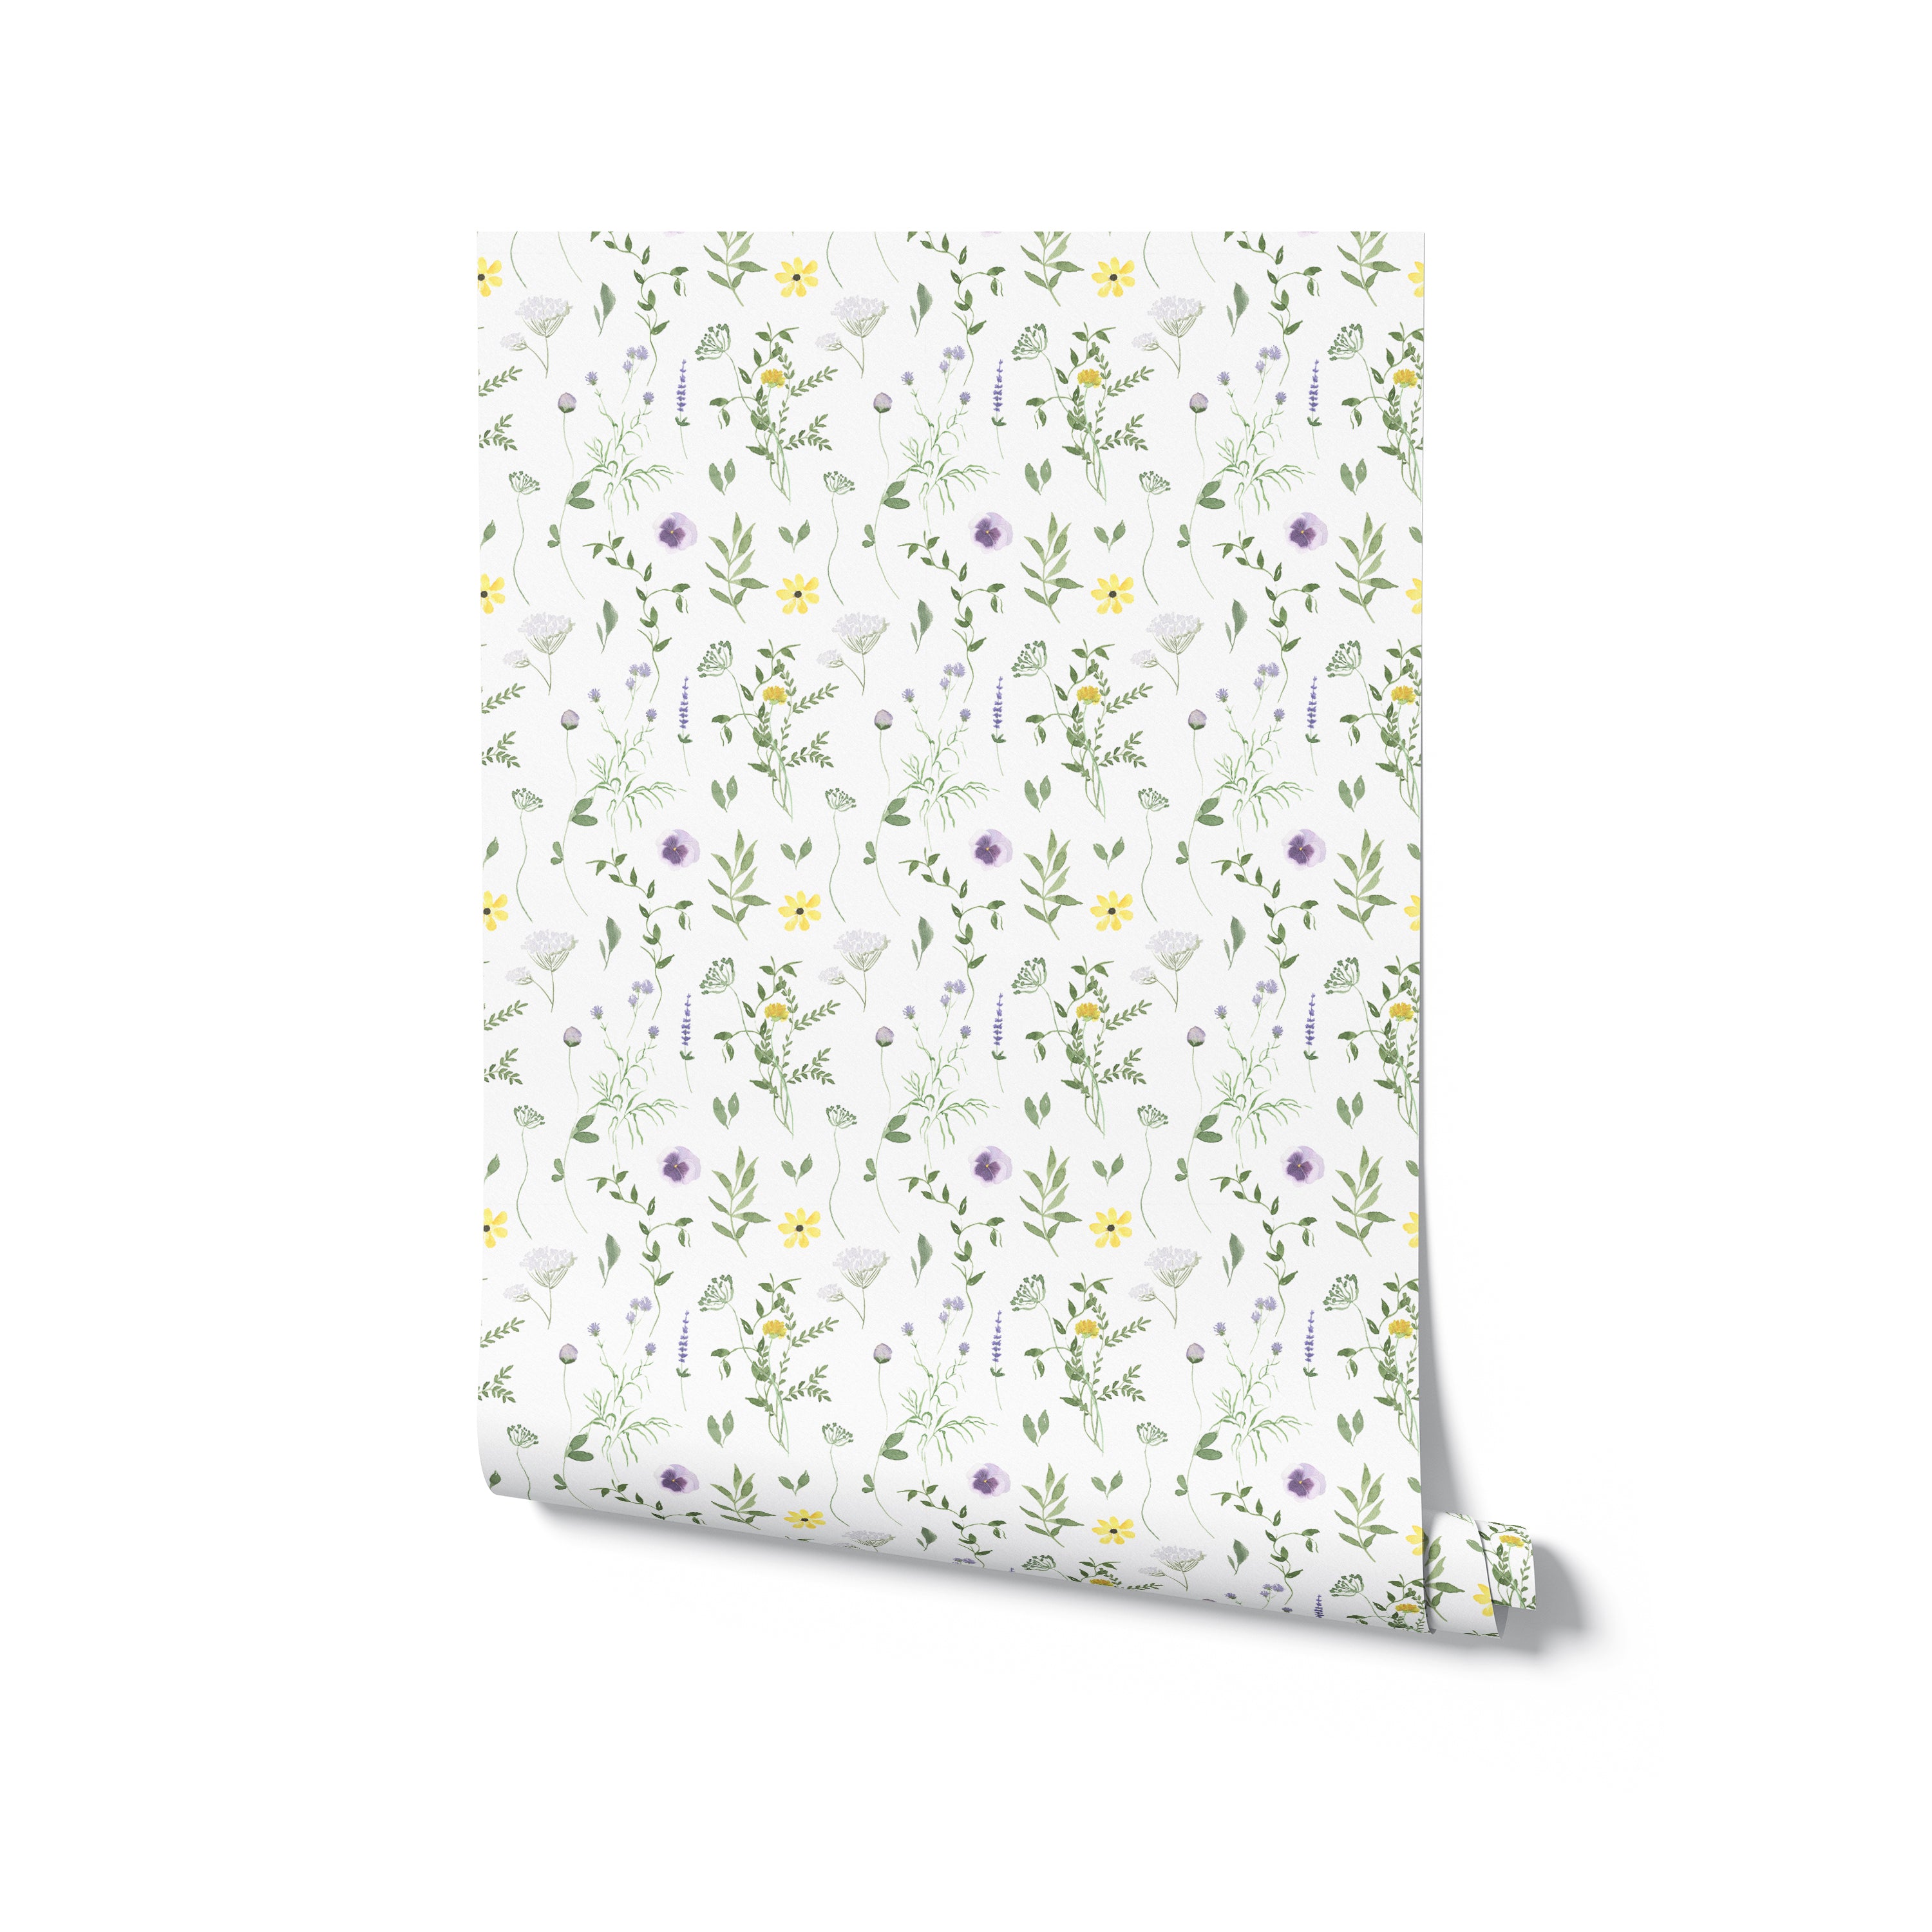 A roll of Spring Field Wallpaper - VII displaying its continuous pattern of purple and yellow flowers with green leaves on a white background, perfect for adding a touch of spring to any room.